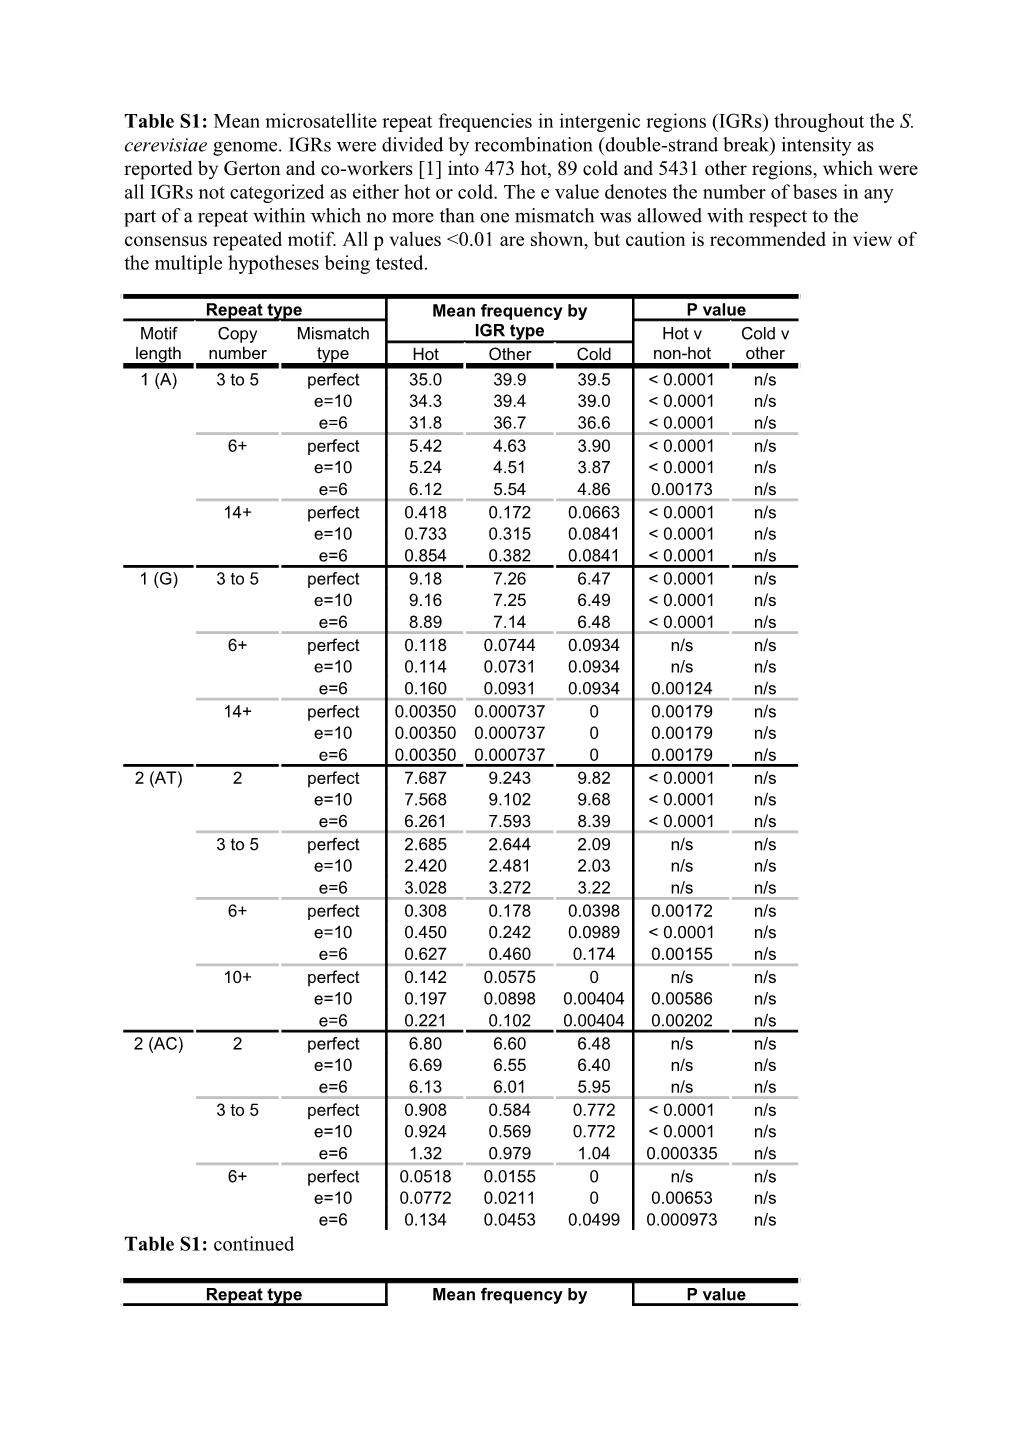 Table S1: Mean Repeat Frequencies in Intergenic Regions Throughout the S